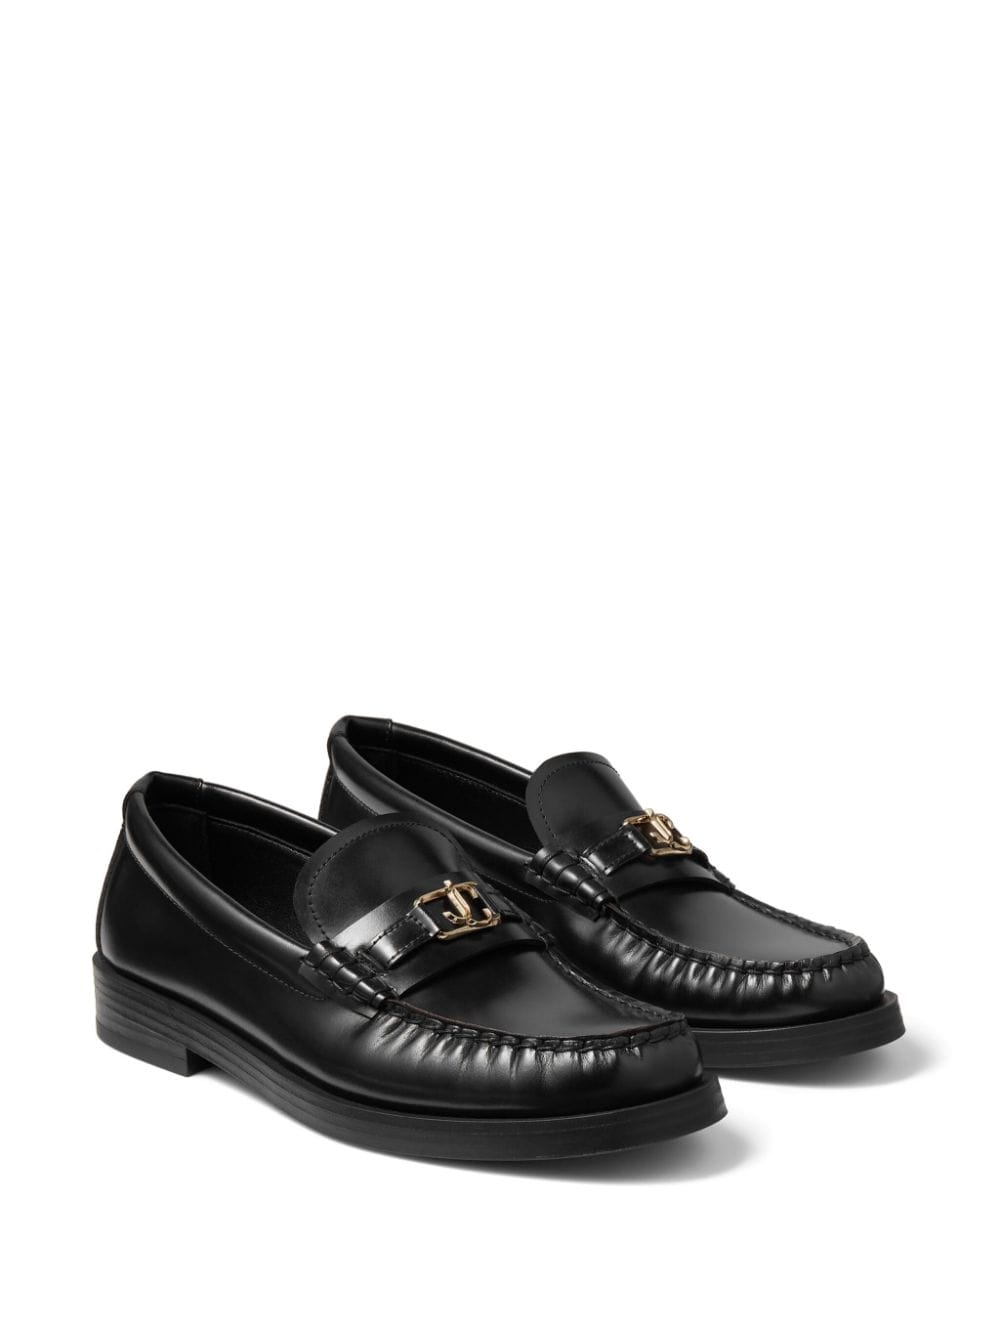 Addie logo-plaque leather loafers<BR/><BR/><BR/>